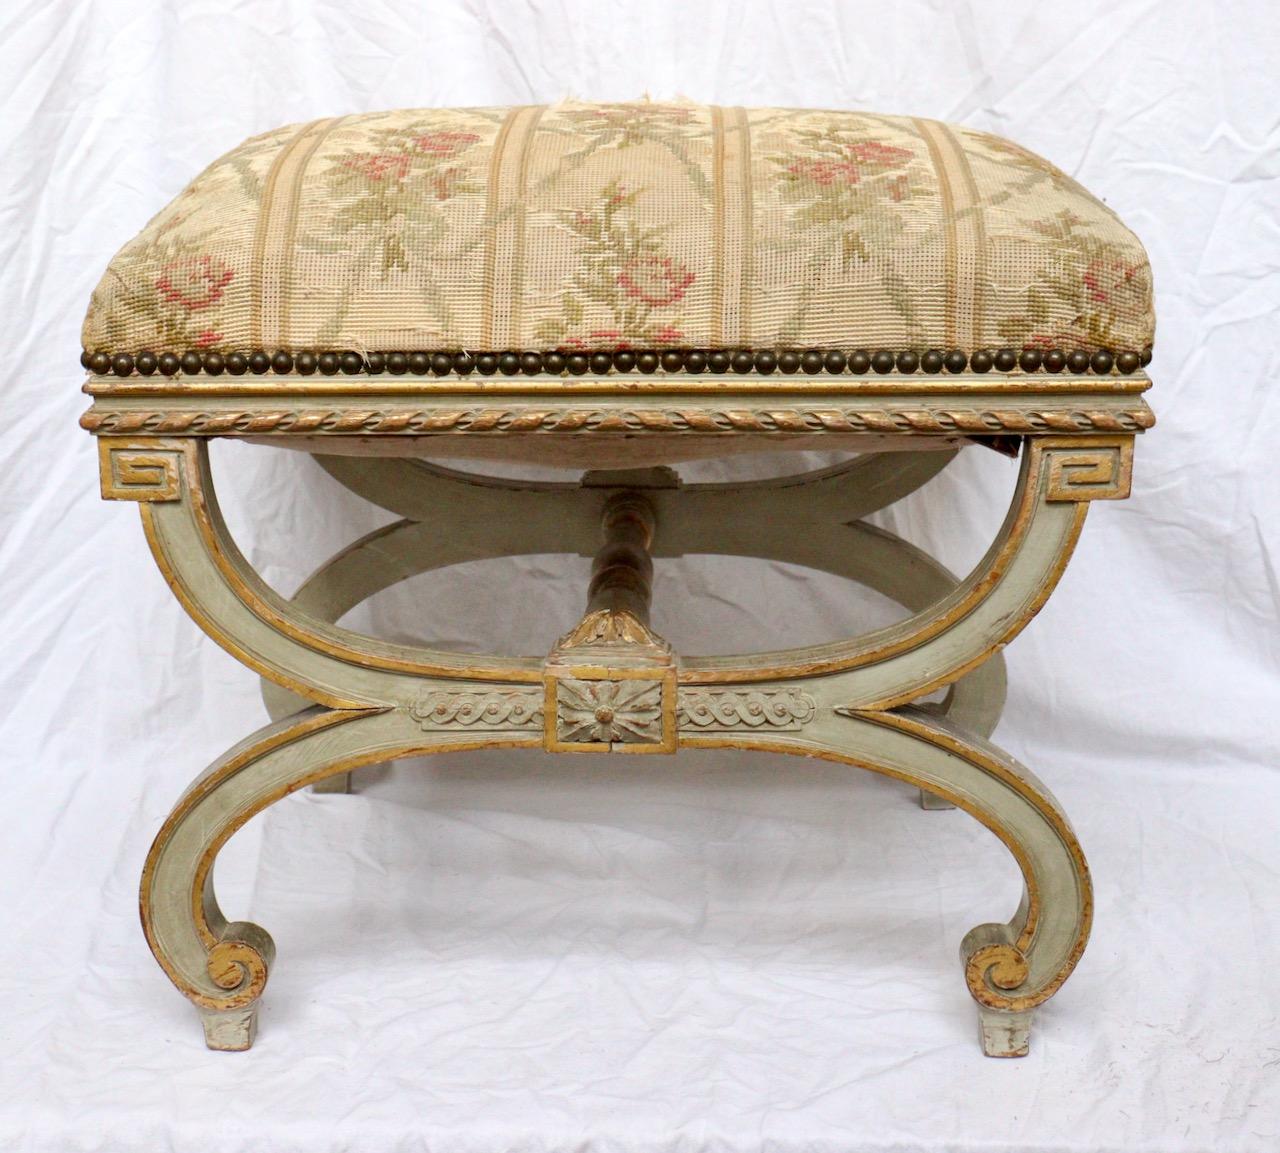 A French 19th century curule stool
Gilt and lacquered wood
Louis XVI Style
Napoléon III Period
circa 1880
Damaged petit point tapestry upholstery.
 